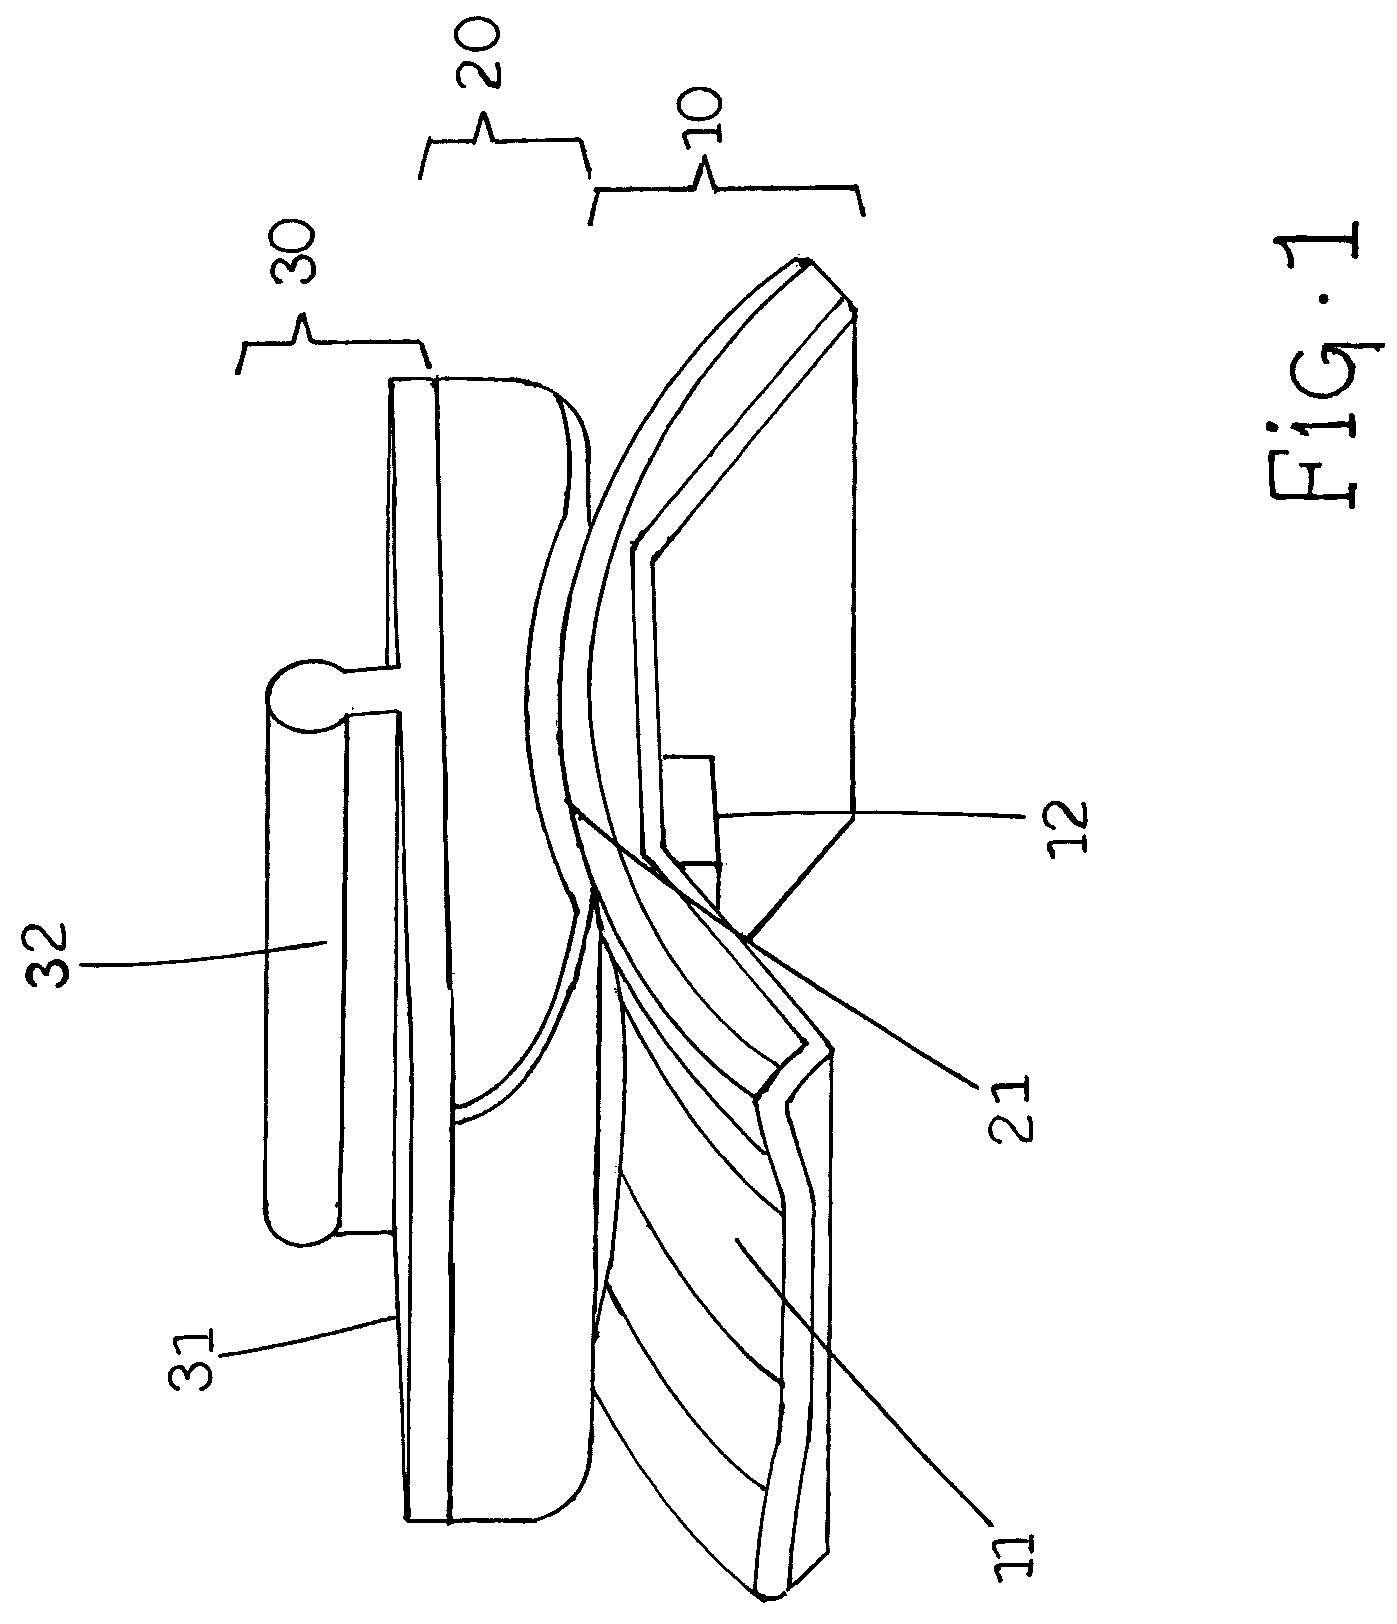 Modular total ankle prosthesis apparatuses and methods